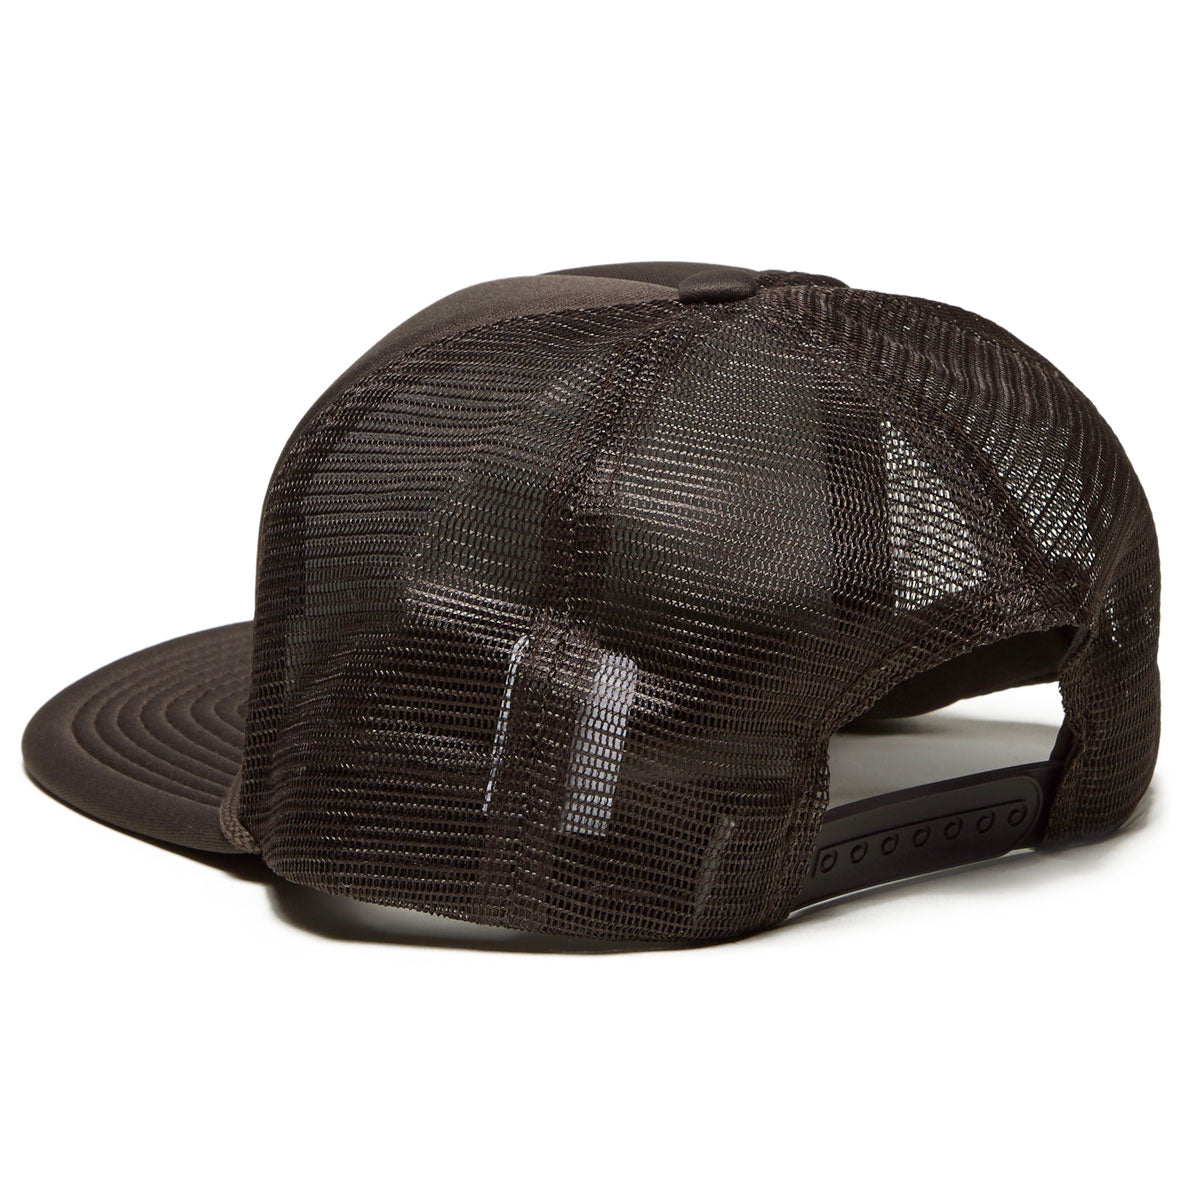 Dogtown Blue Cross Patch Mesh Hat - Charcoal Grey image 2